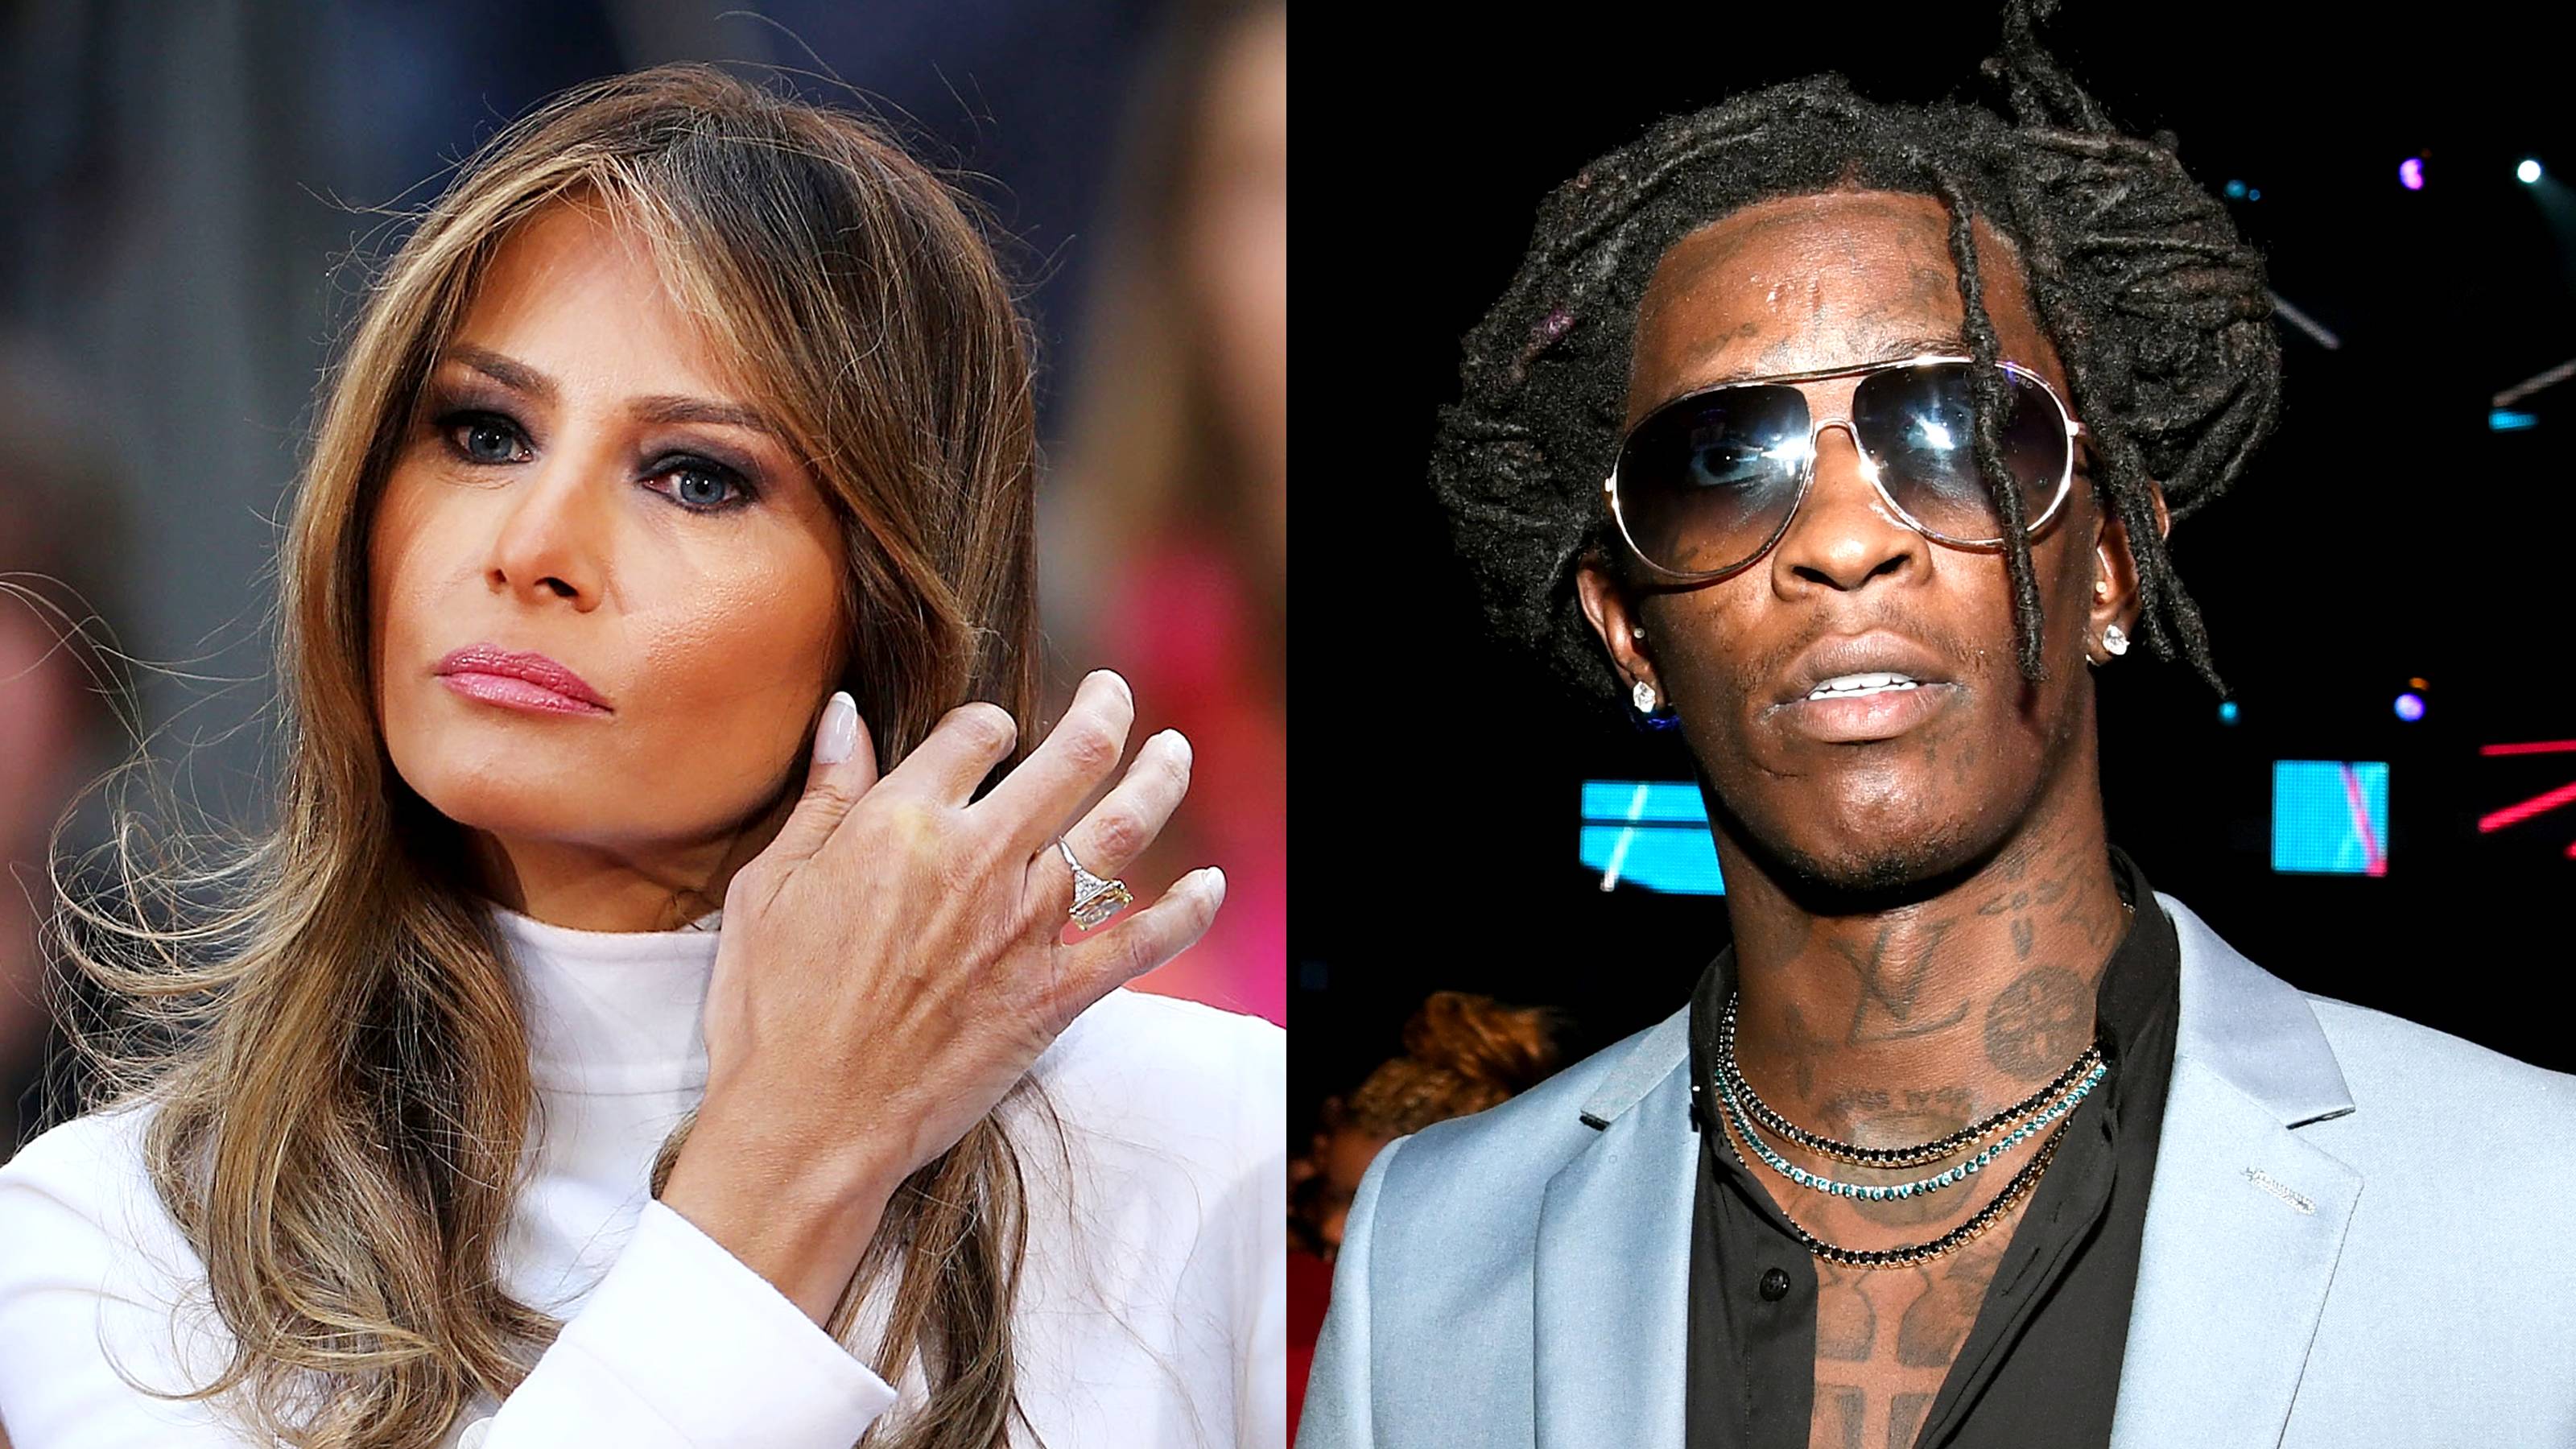 Allow her to reintroduce herself... - The not-so-elusive swagger jackers are a thing that many in hip-hop have had to deal with throughout history. As it turns out, First Lady Michelle Obama has a lot in common with many of the rappers and artists on this list you’re about to see — and she has Melania Trump to thank for that. If you haven’t already heard, last night at the Republican National Convention, Mrs. Trump totally swagger jacked much of our first lady’s speech from the 2008 Democratic National Convention and, well, the internet had a field day. So we decided to pay homage to some notorious swagger jackers. You’re in good company, Mrs. Trump. — Jon Reyes(Photos from Left: Spencer Platt/Getty Images, Paras Griffin/BET/Getty Images for BET)&nbsp;